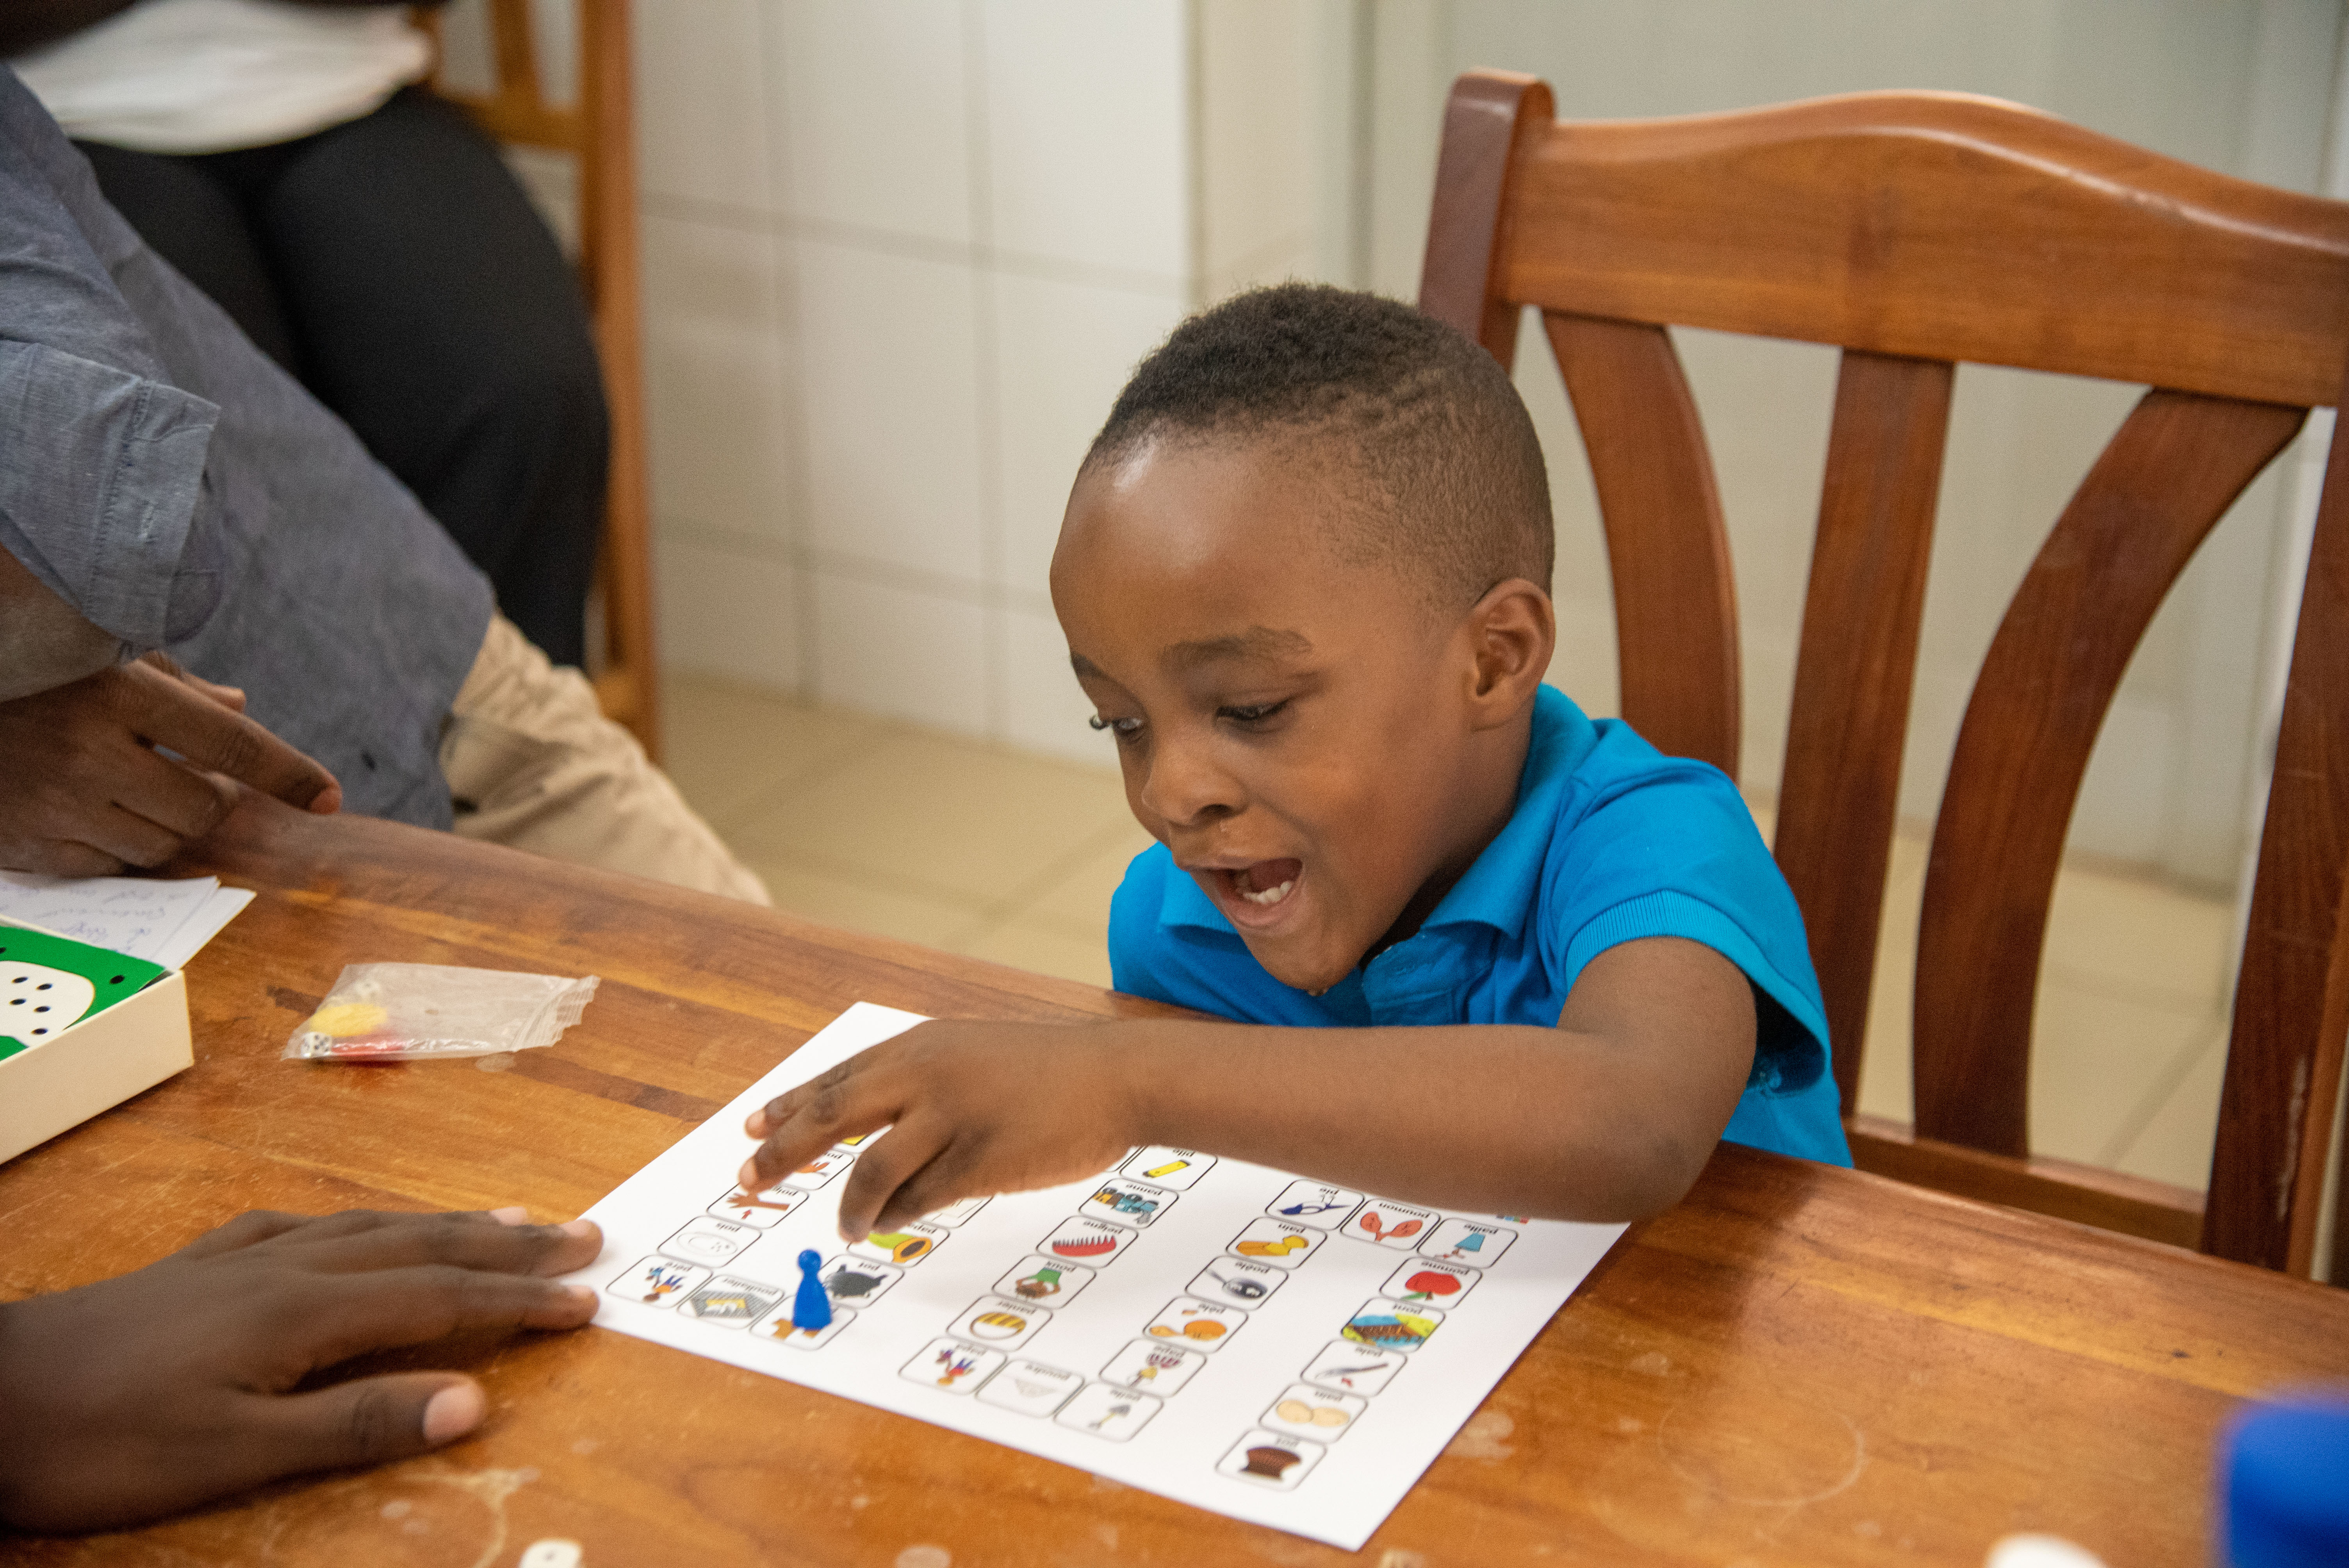 A young boy sitting and playing a speech therapy board game